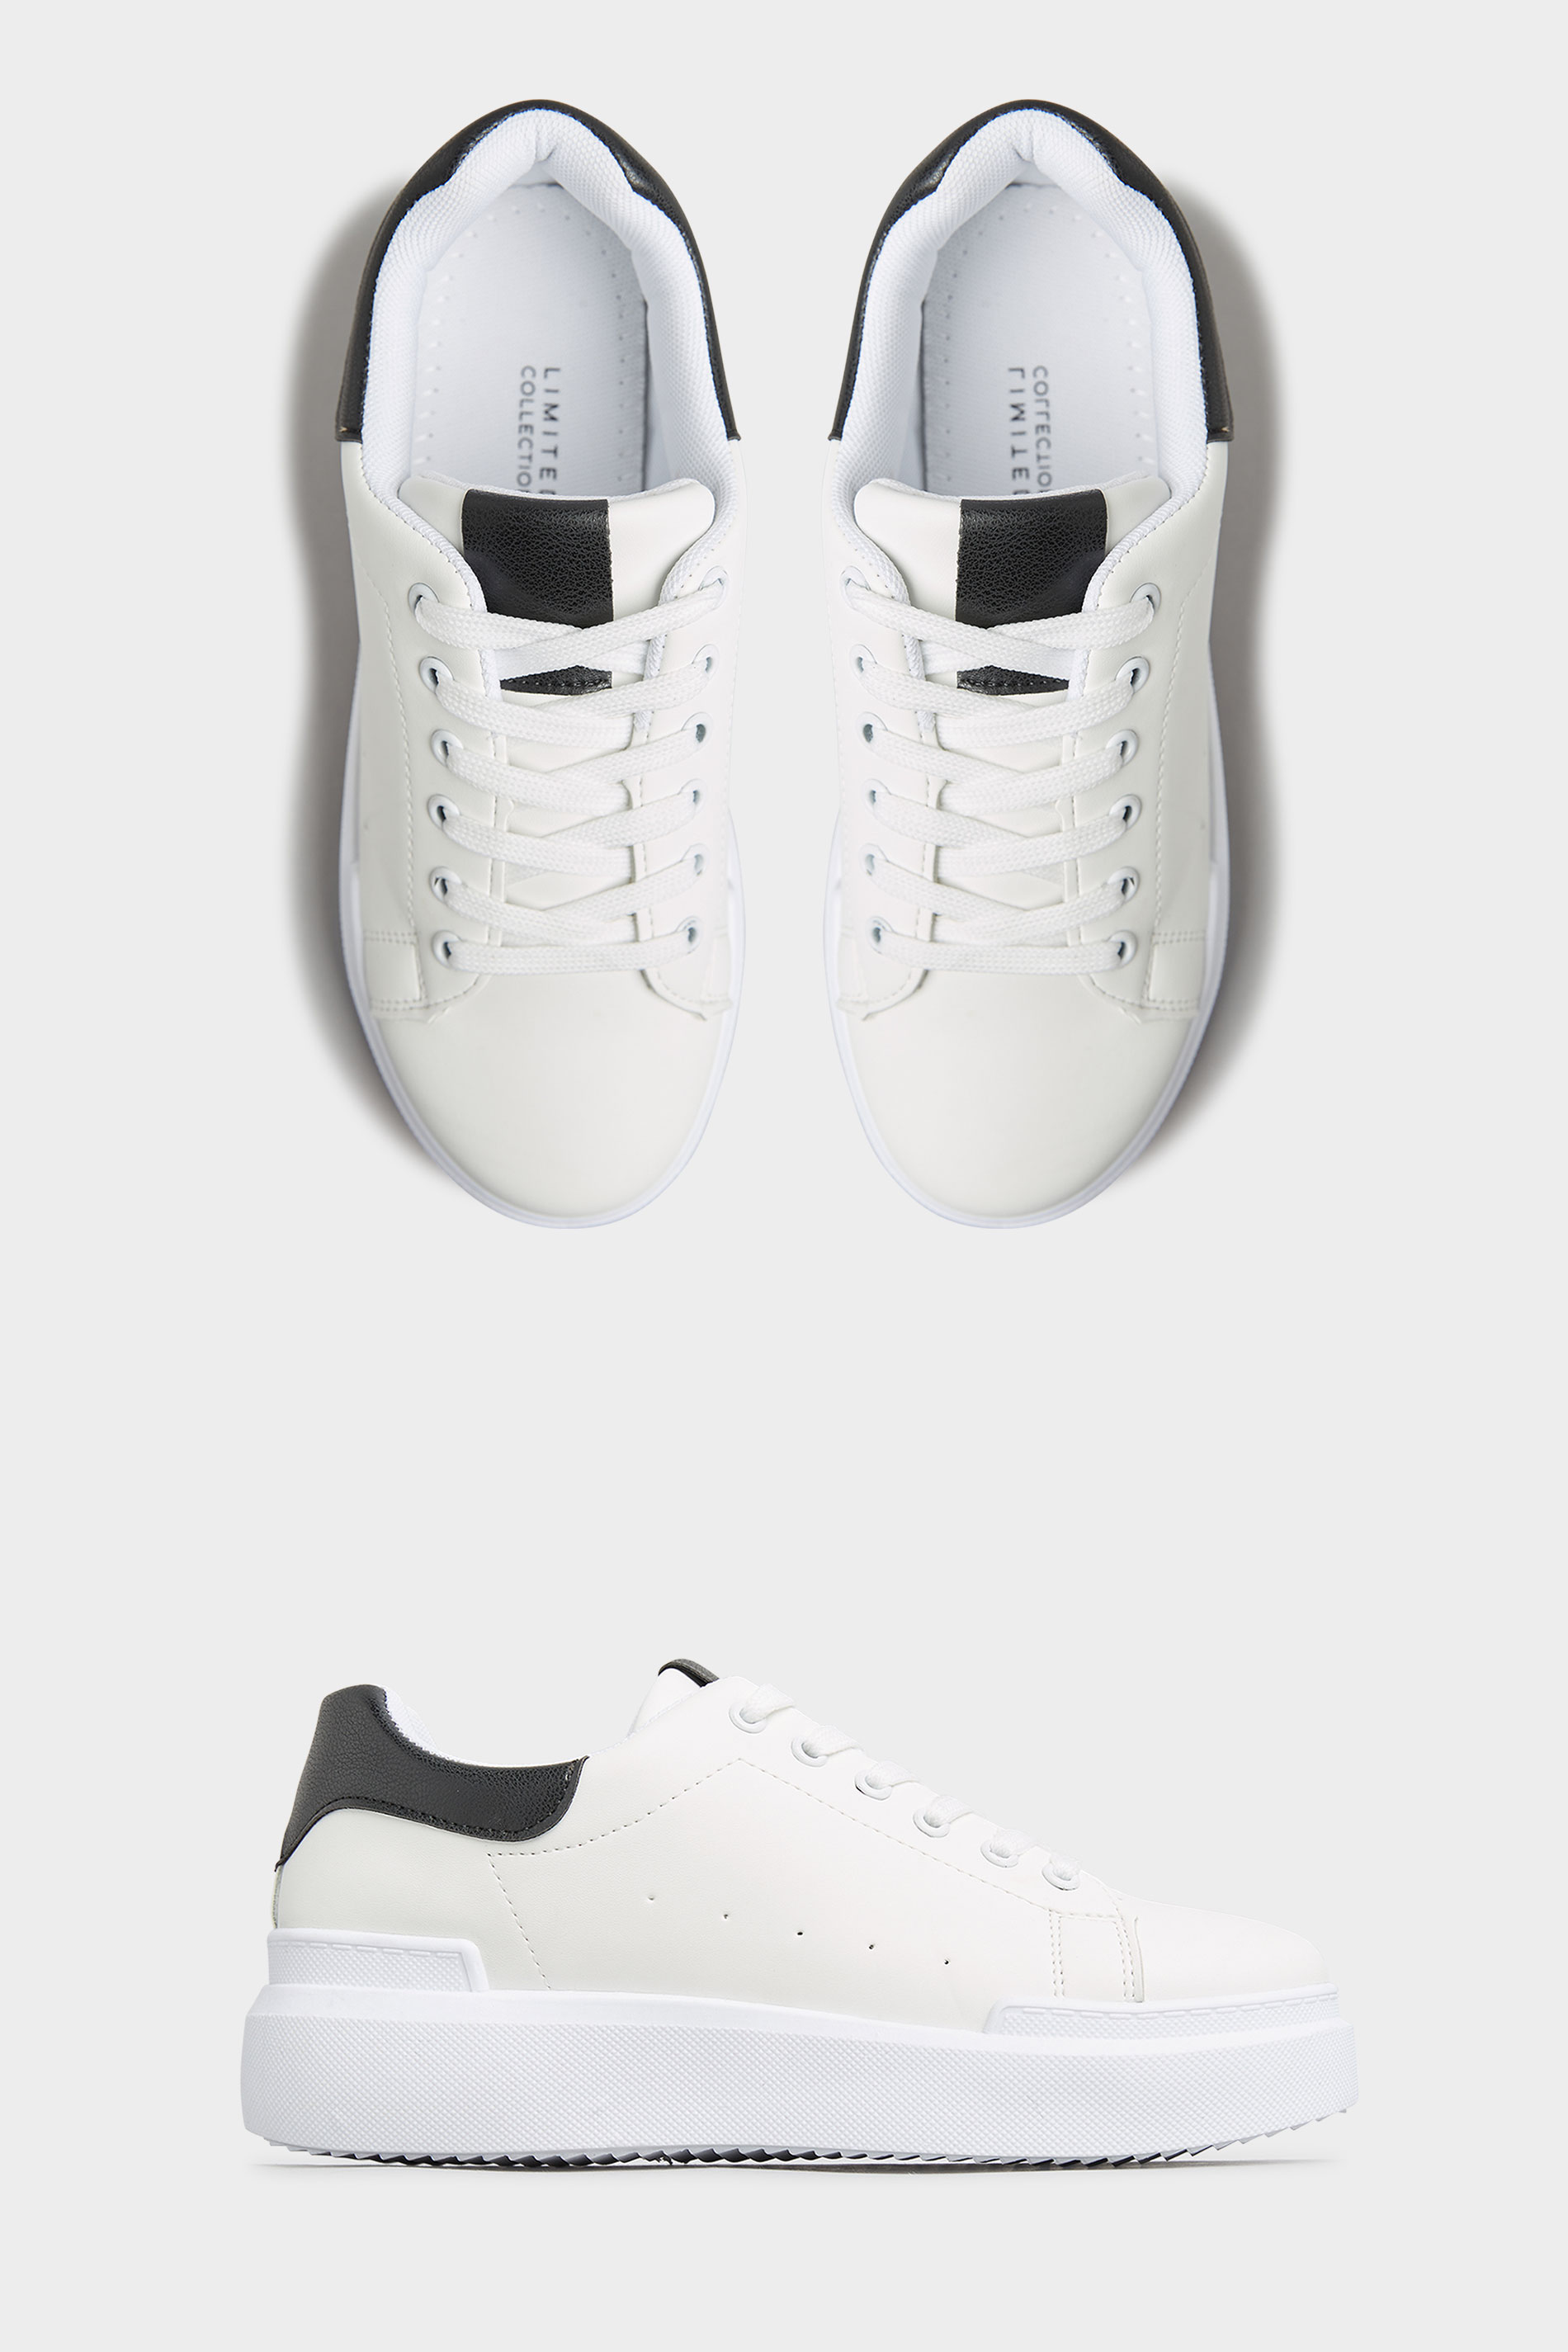 Chaussures Pieds Larges Tennis & Baskets (Regular Fit & Pieds Larges) | LIMITED COLLECTION - Tennis Blanches & Noires - IQ09007